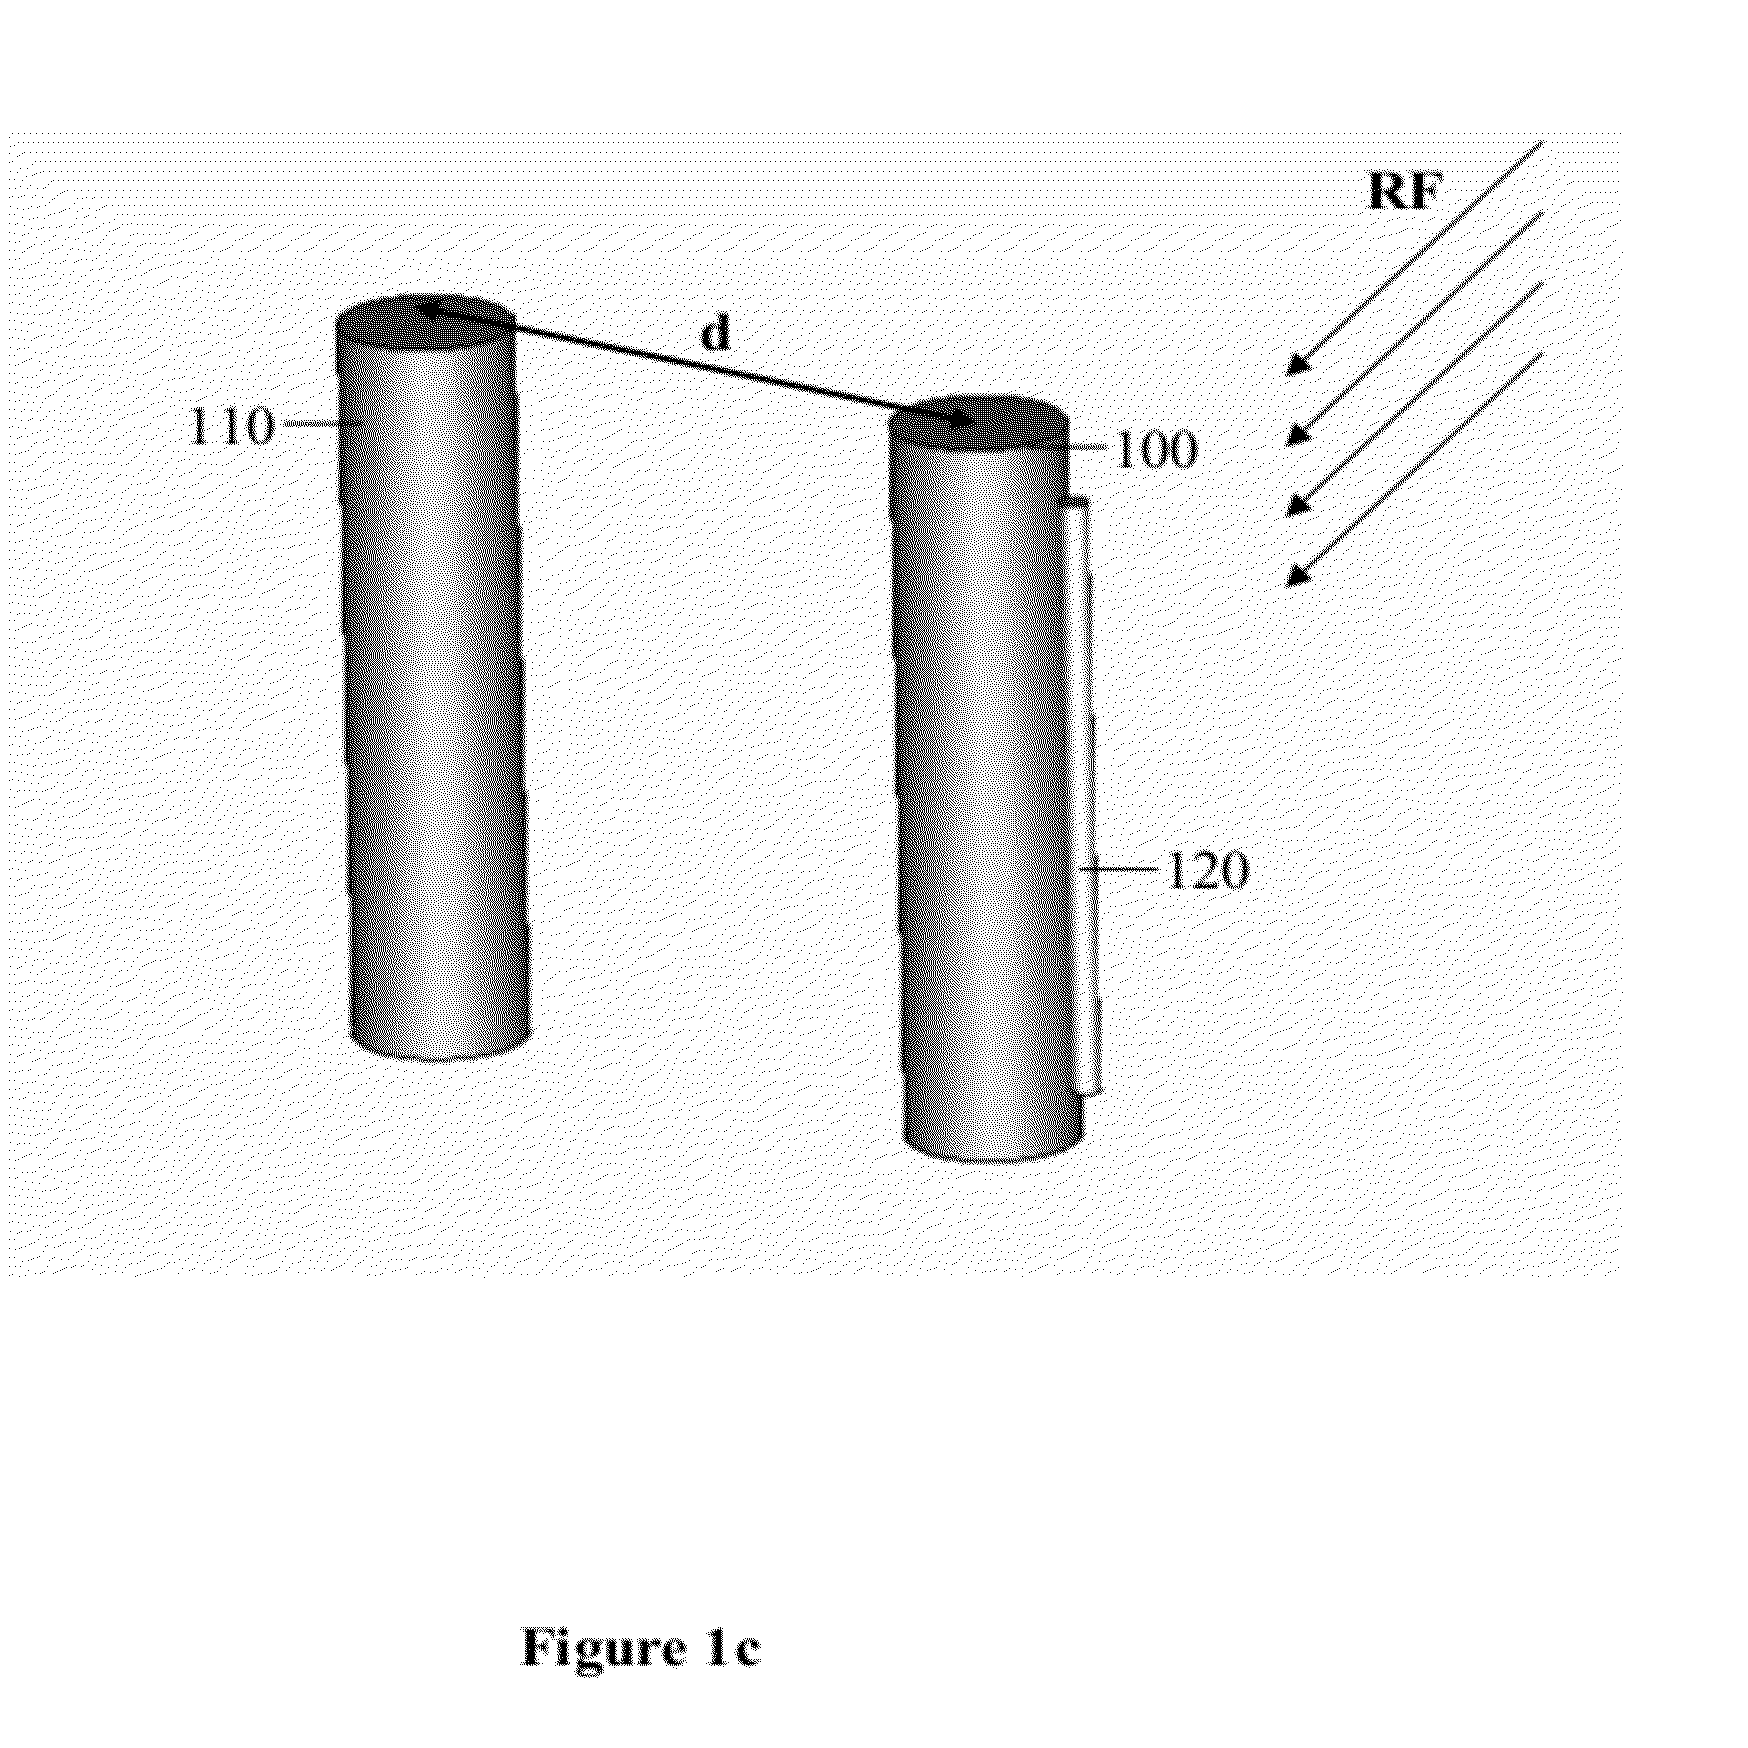 Apparatus and method for concentrating electromagnetic energy on a remotely-located object